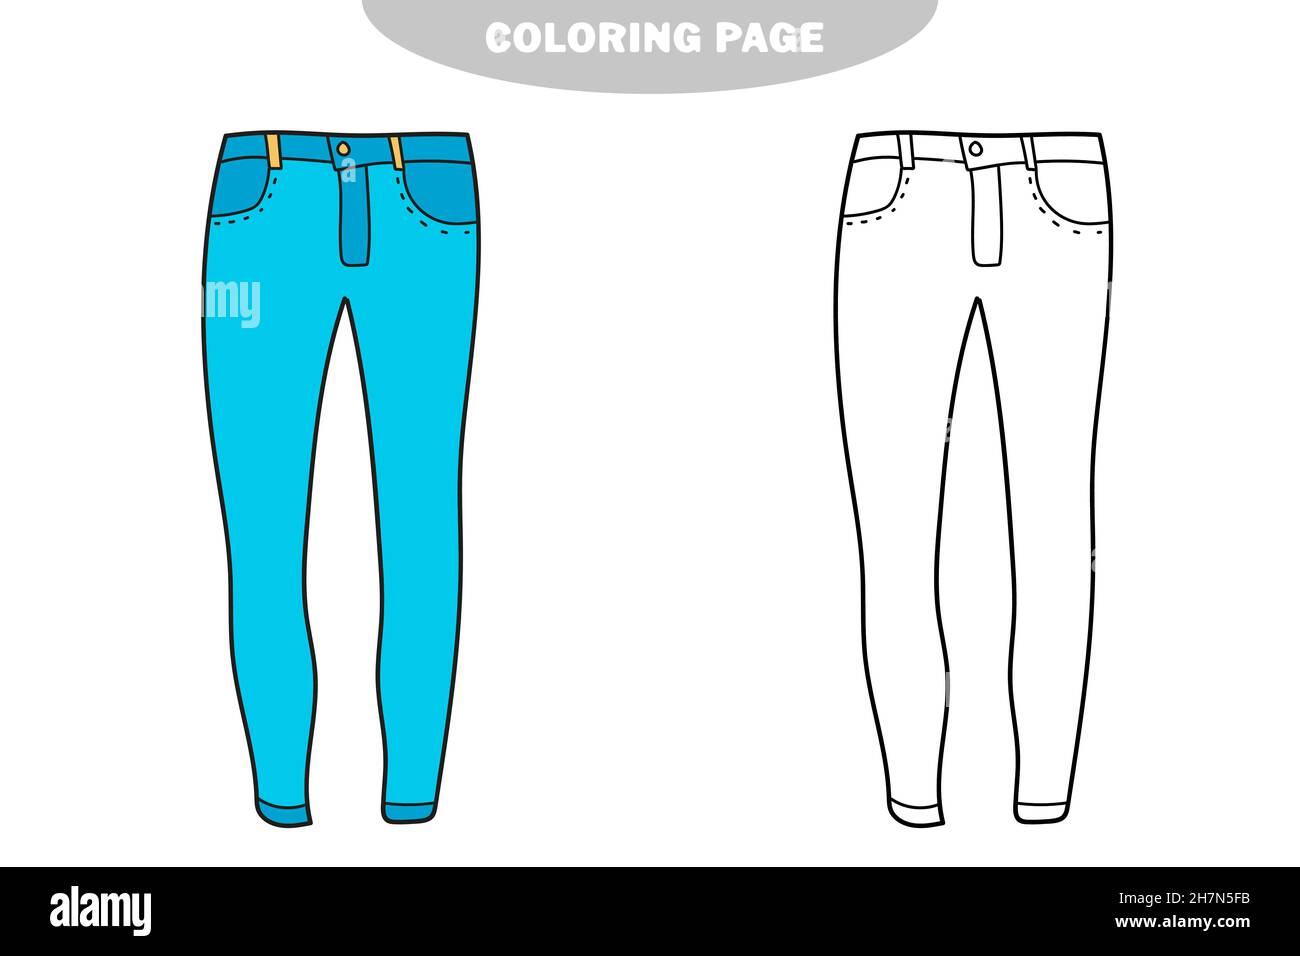 Pants Free Coloring Pages - Pants Coloring Pages - Coloring Pages For Kids  And Adults